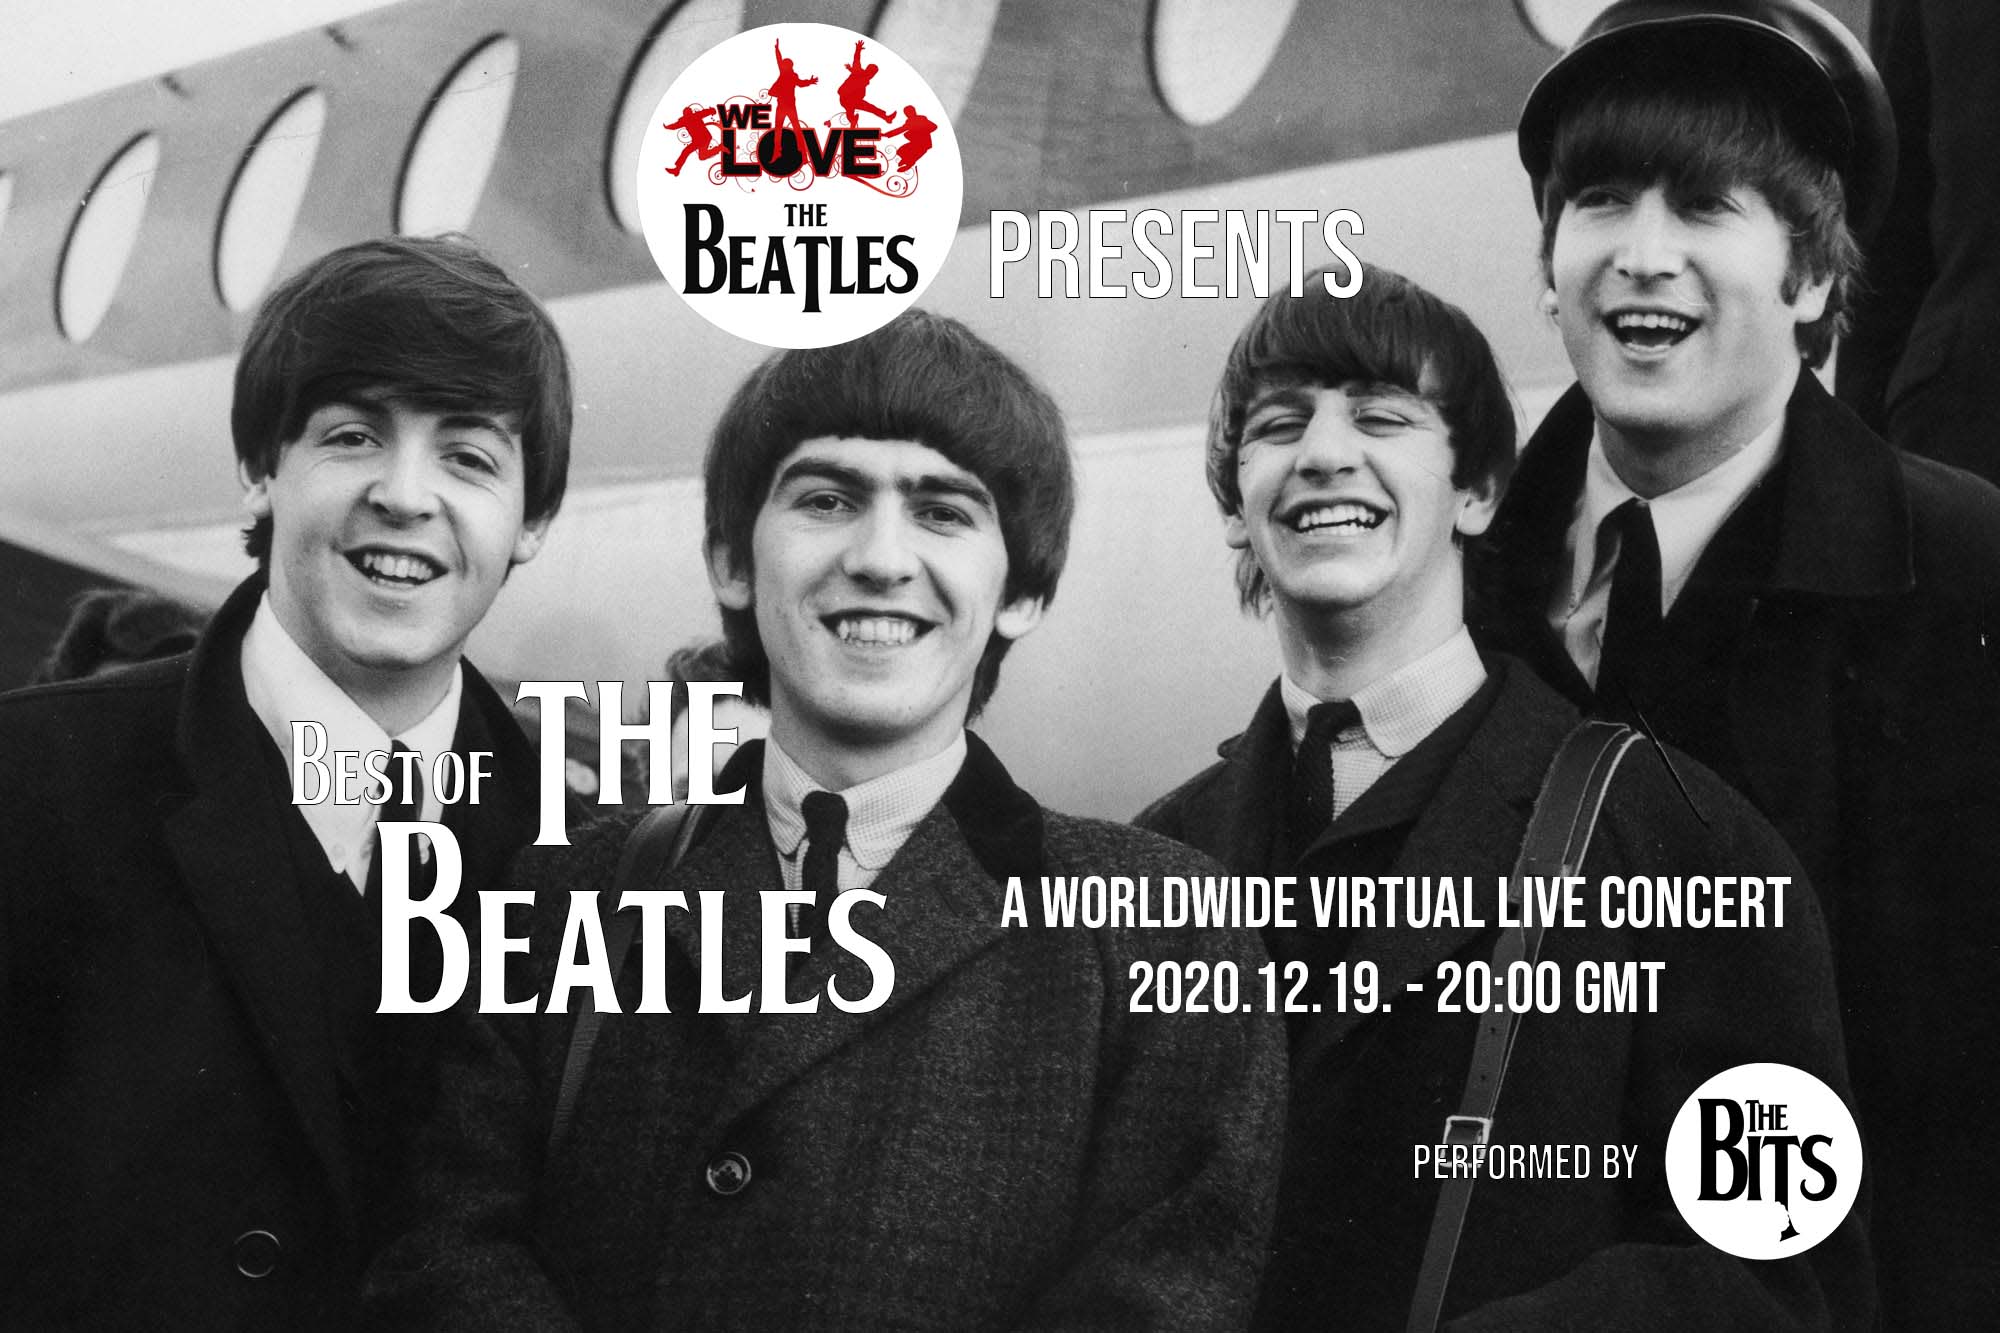 Best of the Beatles - A Worldwide Virtual Live Concert